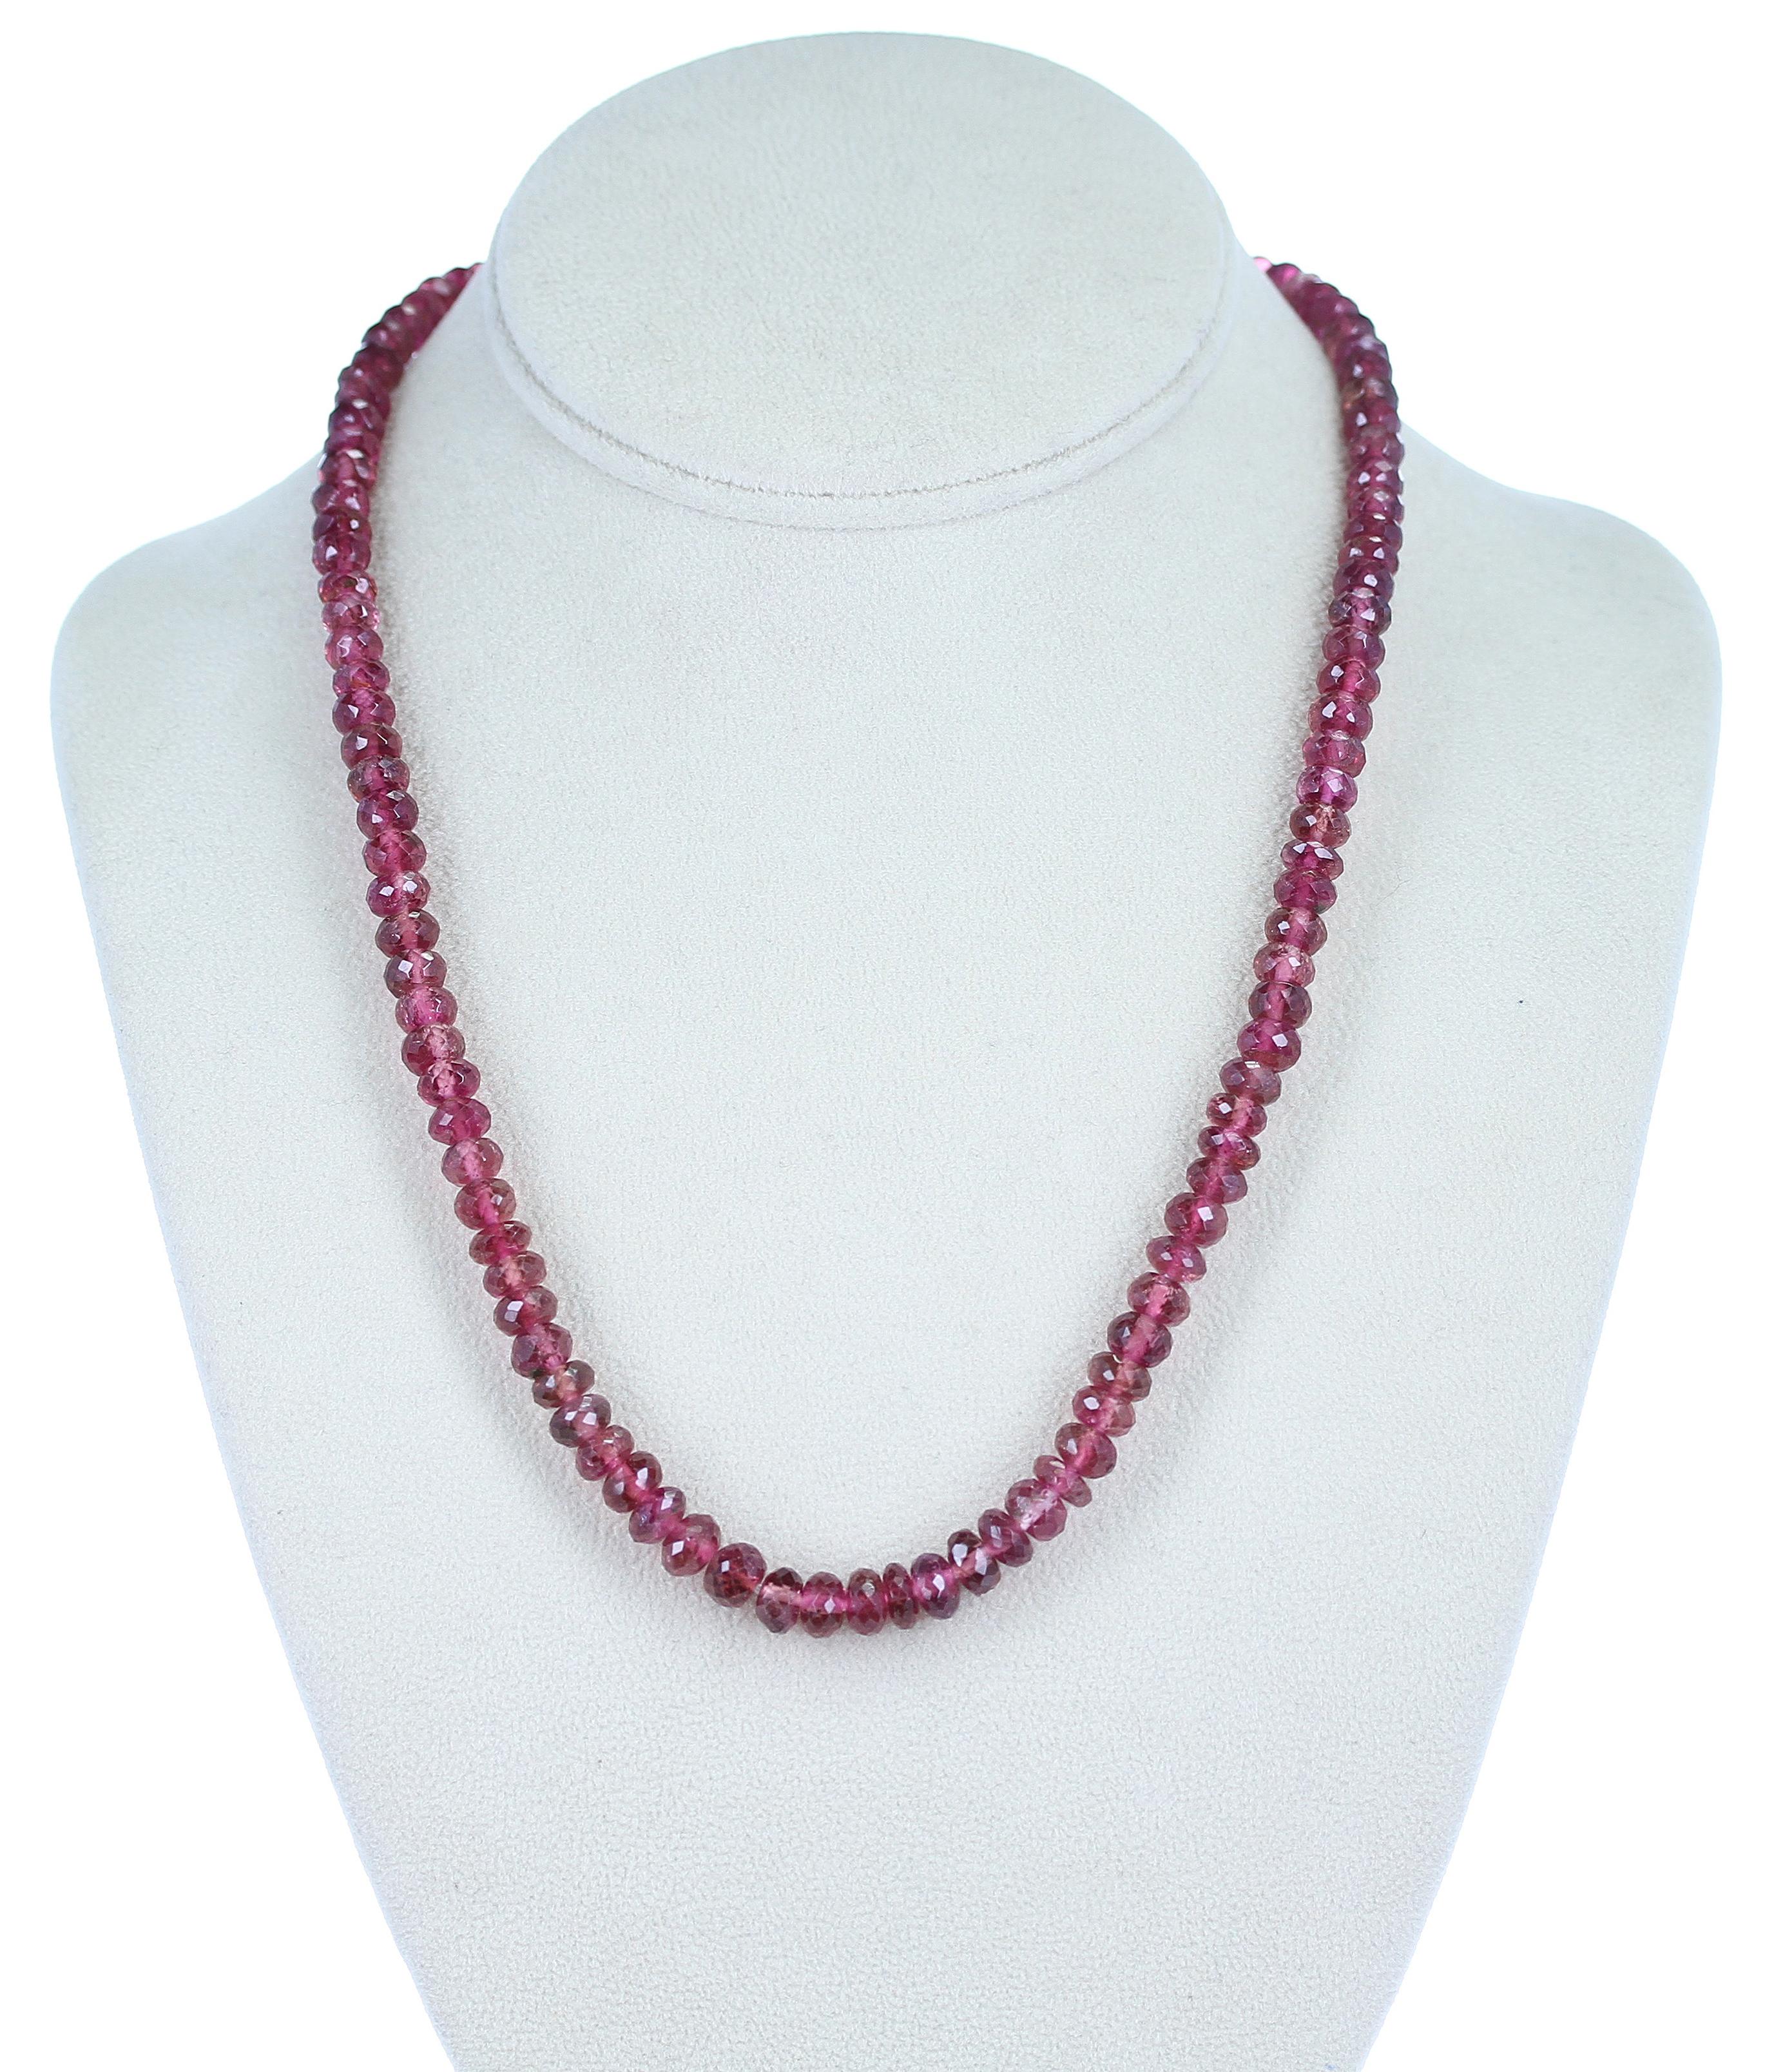 A large-sized strand of Pink Tourmaline Faceted Beads weighing 185 cts. Length: 19 inches, Range: 6-7.5MM